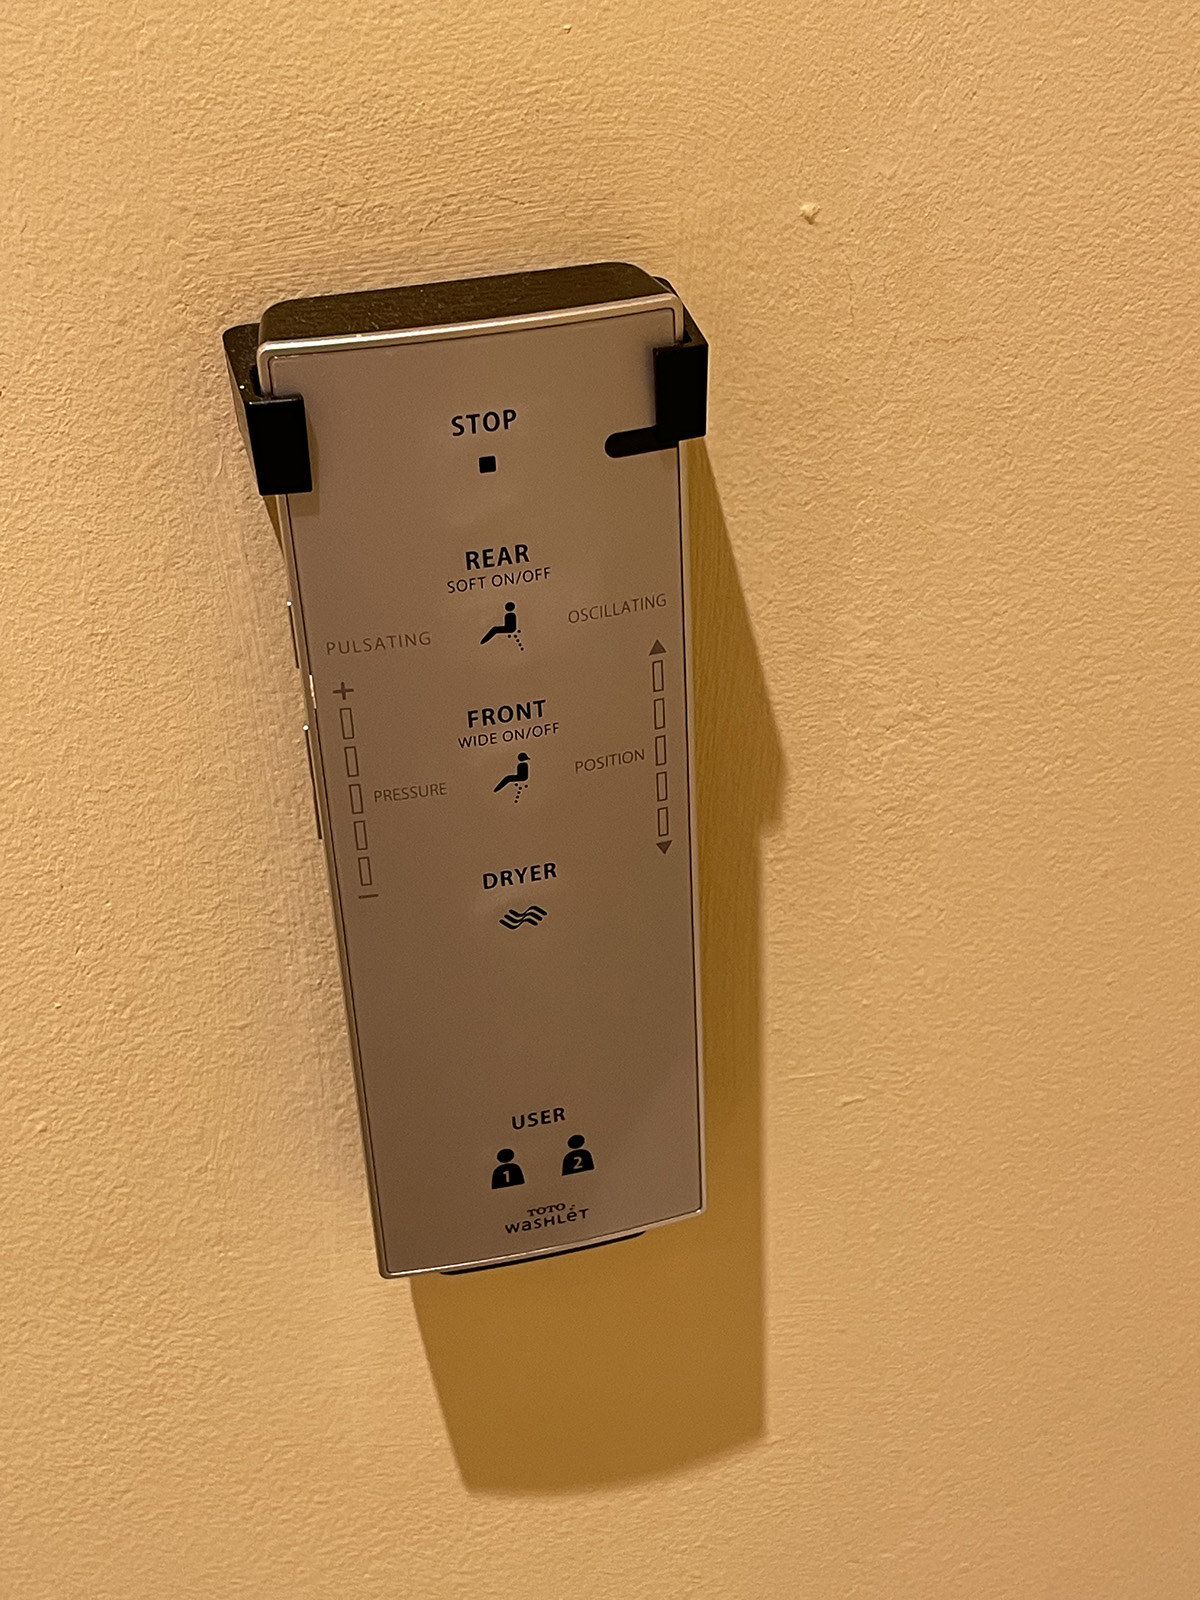 A remote control for a Toto Washlet bidet including water pressure and position controls and a button for a dryer